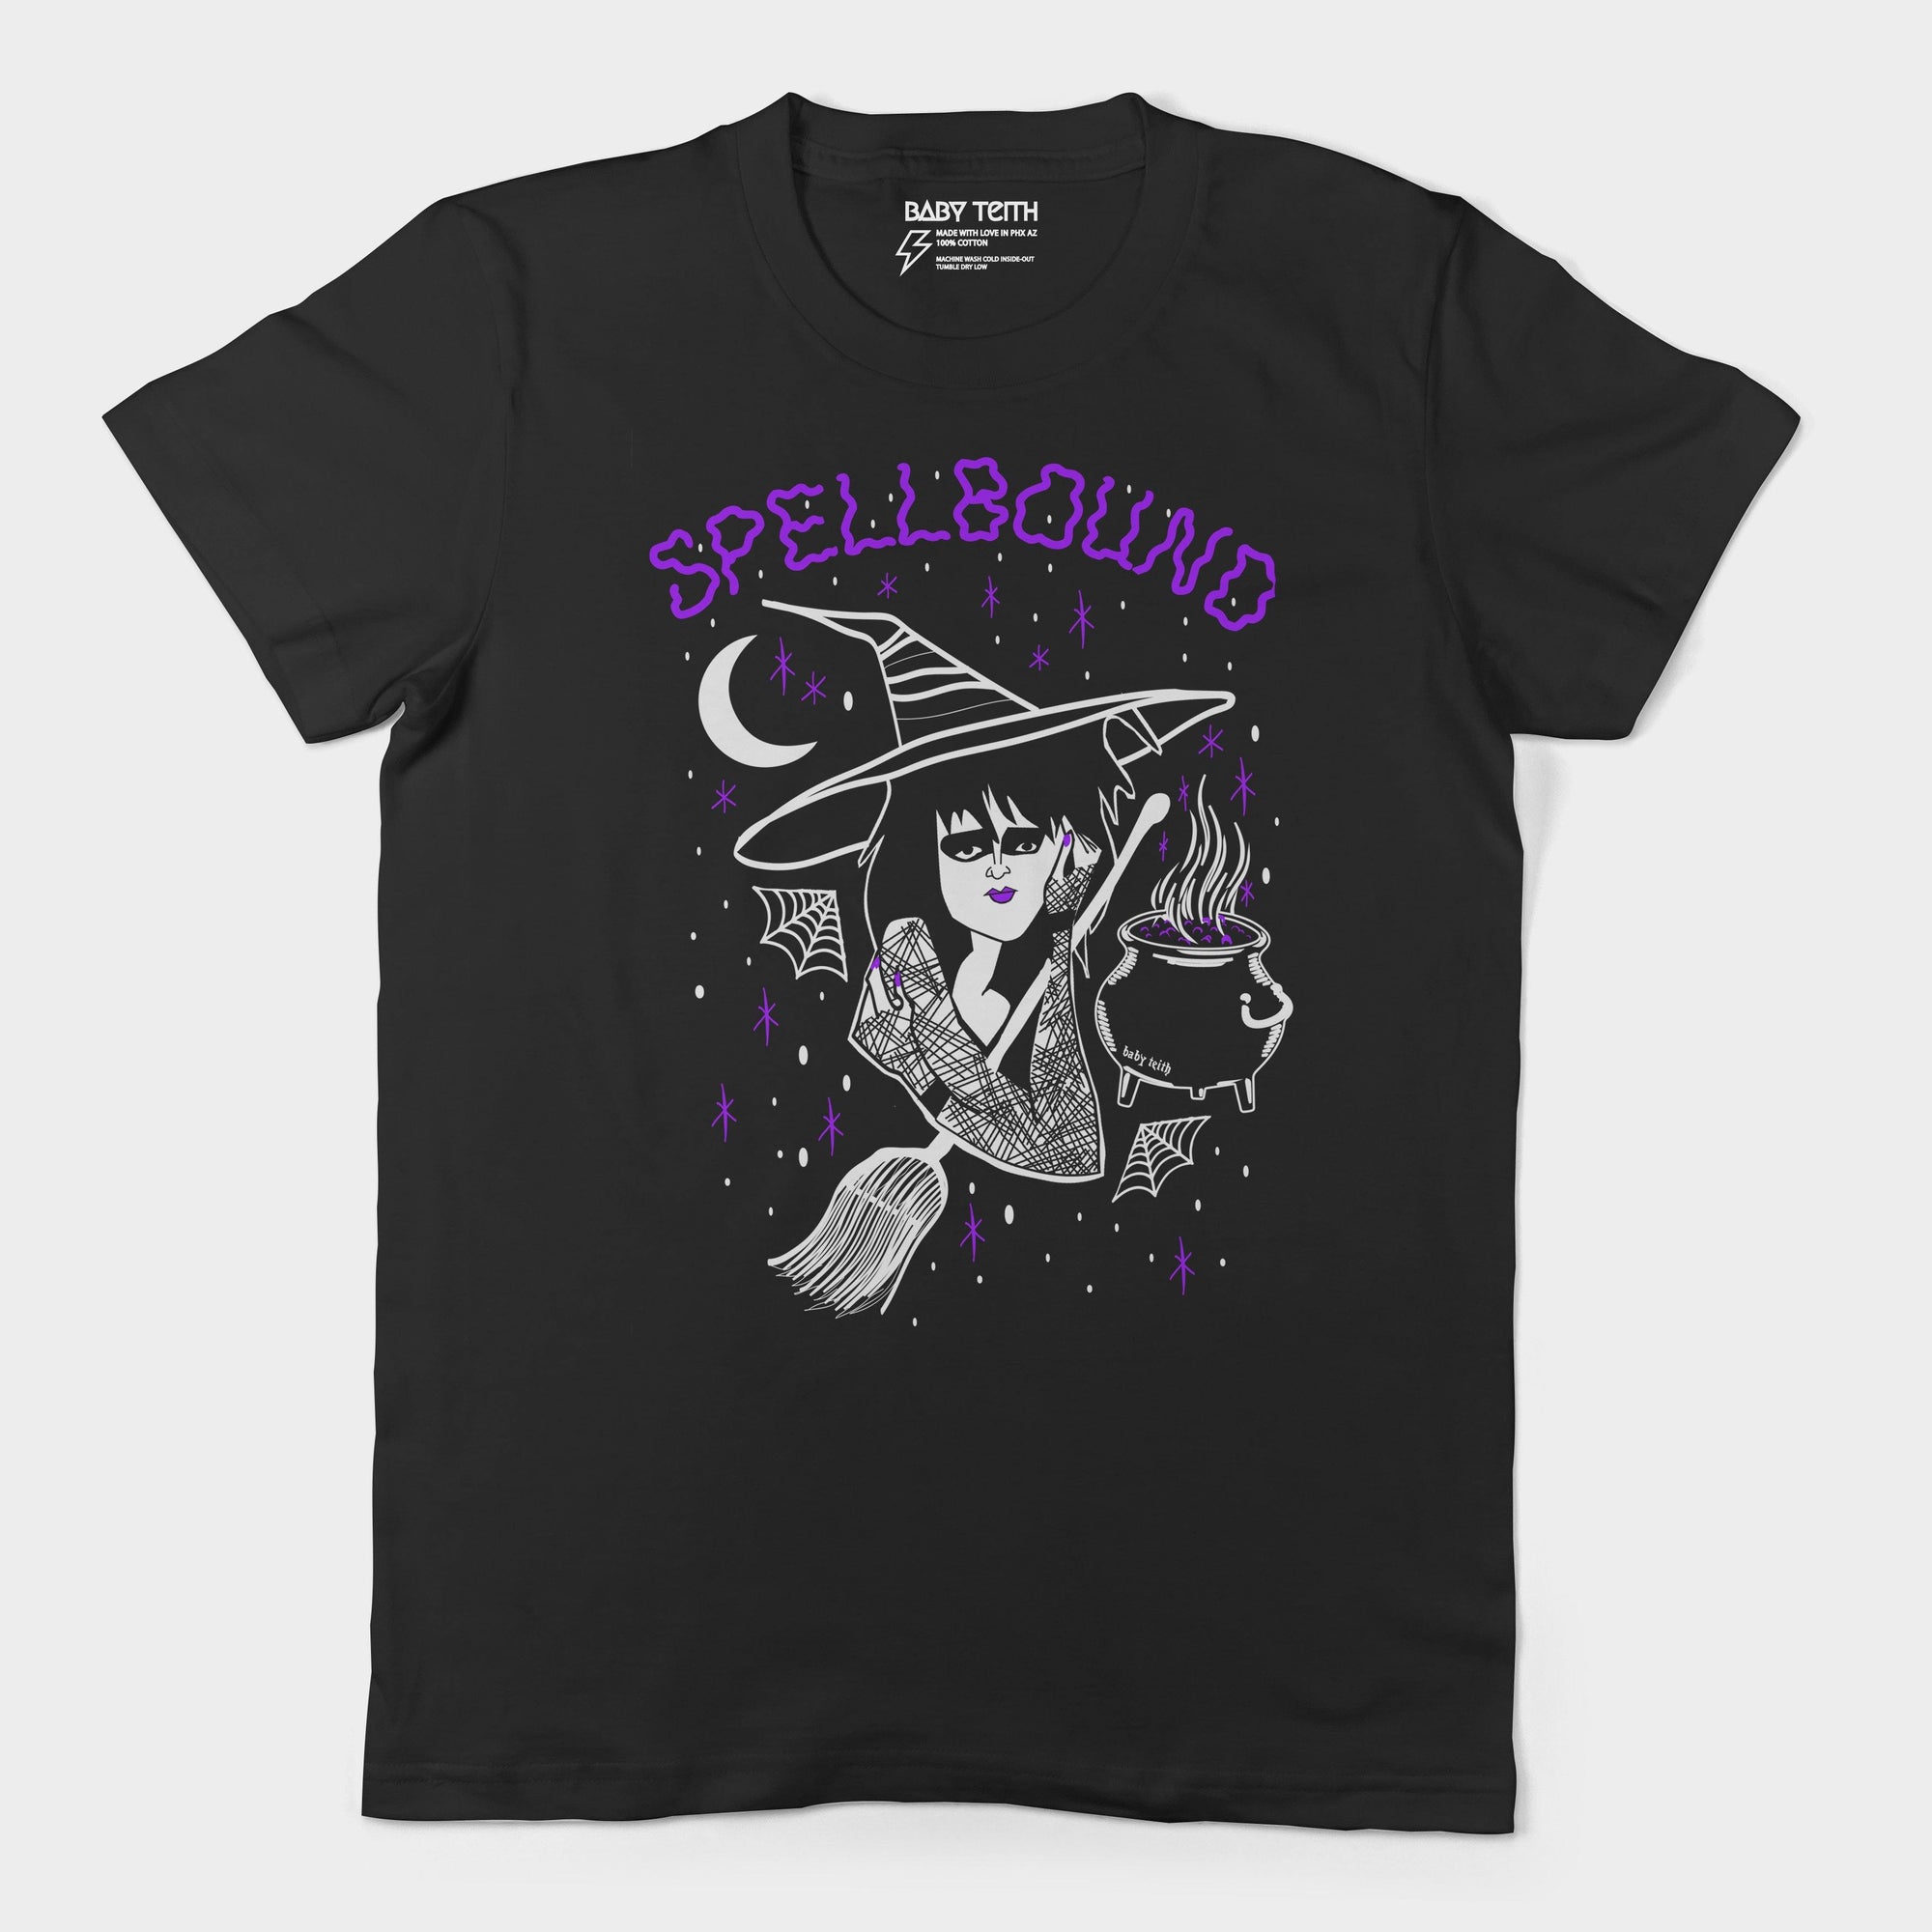 Spellbound Unisex Tee for Adults - Baby Teith